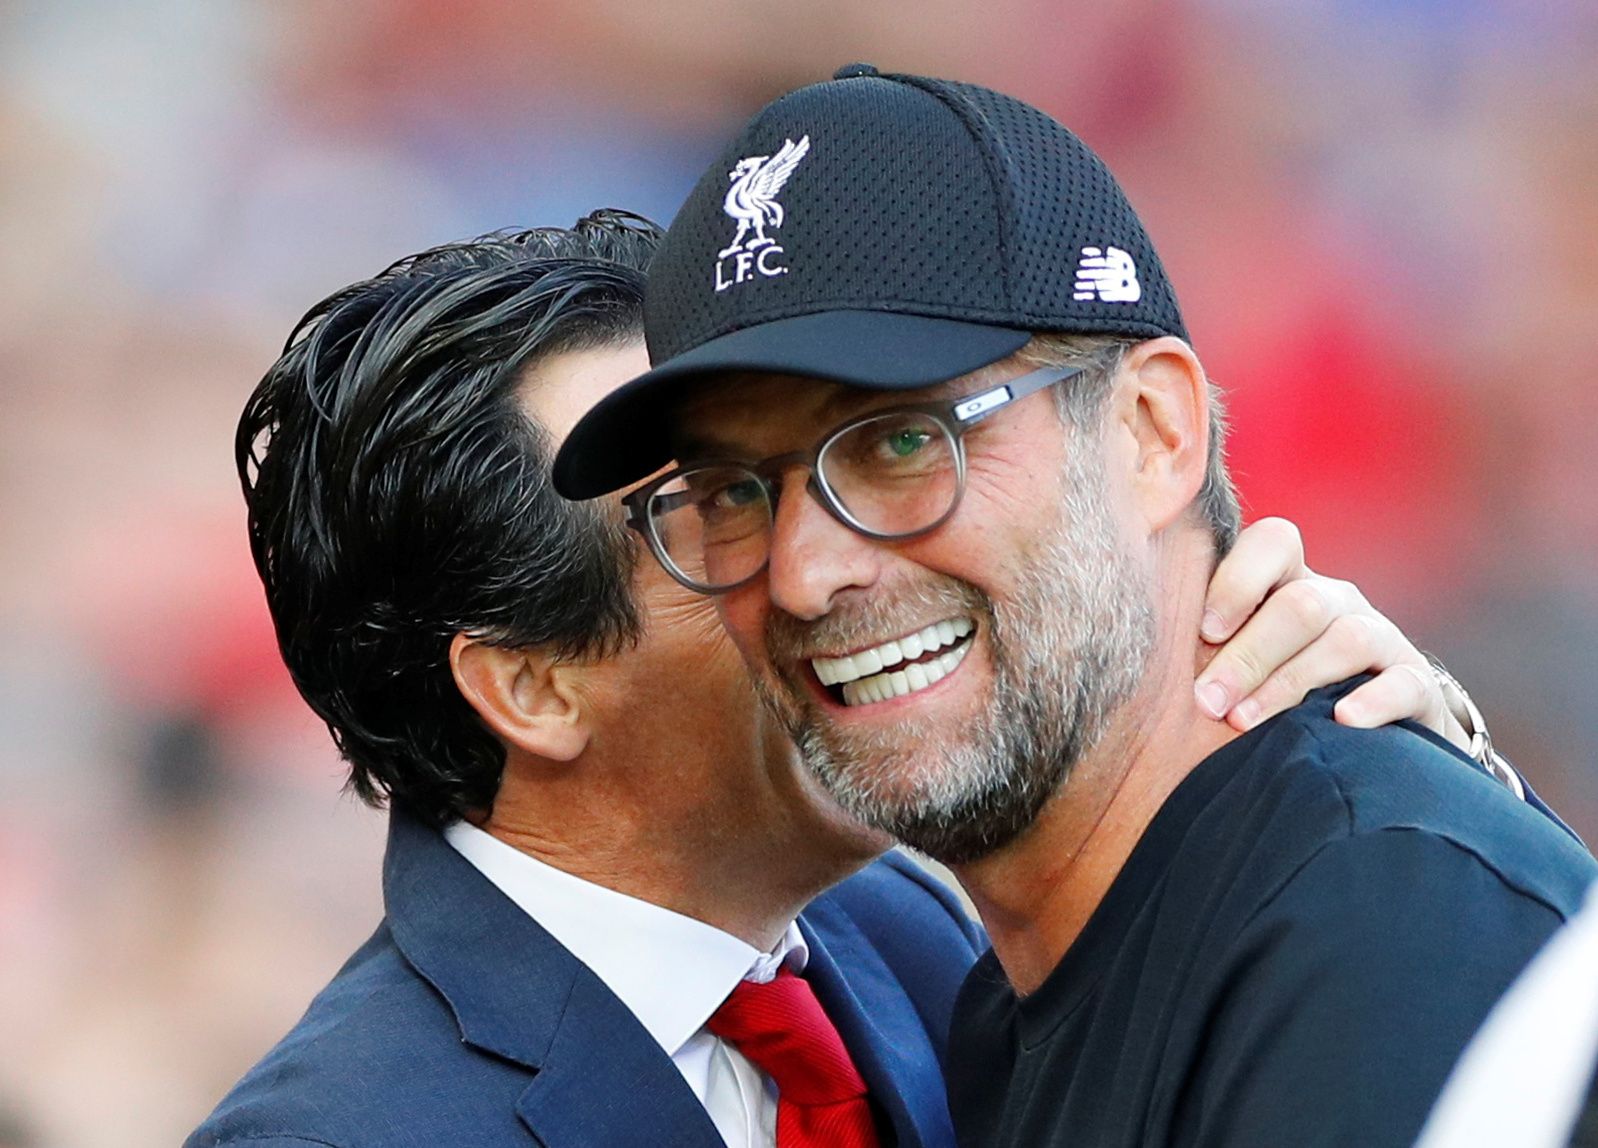 Soccer Football - Premier League - Liverpool v Arsenal - Anfield, Liverpool, Britain - August 24, 2019  Arsenal manager Unai Emery with Liverpool manager Jurgen Klopp before the match   REUTERS/Phil Noble  EDITORIAL USE ONLY. No use with unauthorized audio, video, data, fixture lists, club/league logos or 